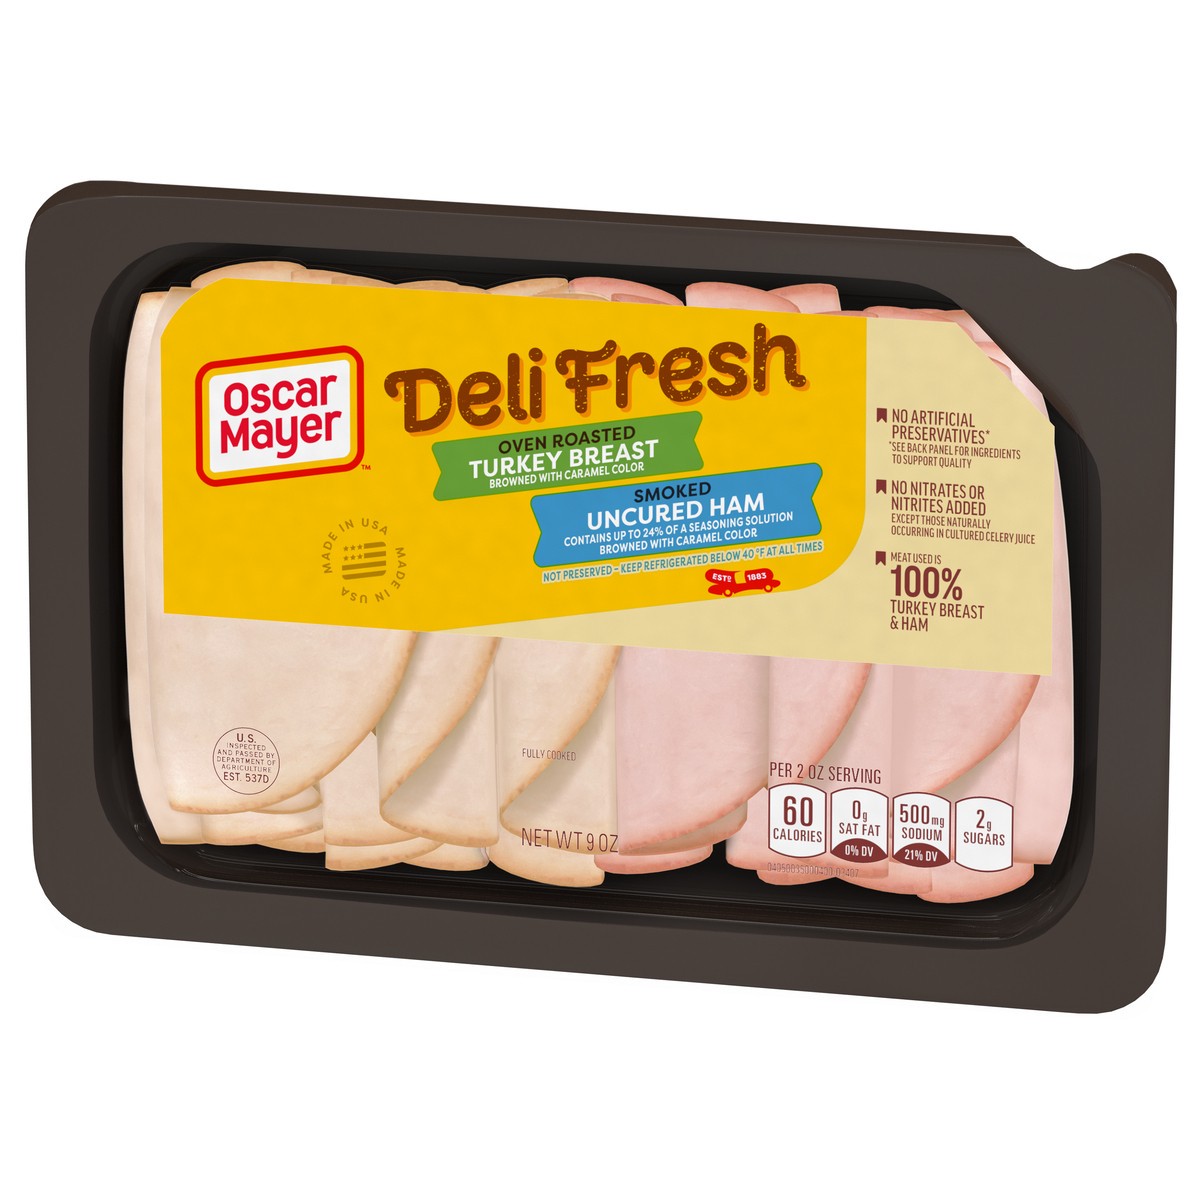 slide 6 of 9, Oscar Mayer Deli Fresh Oven Roasted Turkey Breast & Smoked Uncured Ham Sliced Lunch Meat Variety Pack, 9 oz. Tray, 9 oz